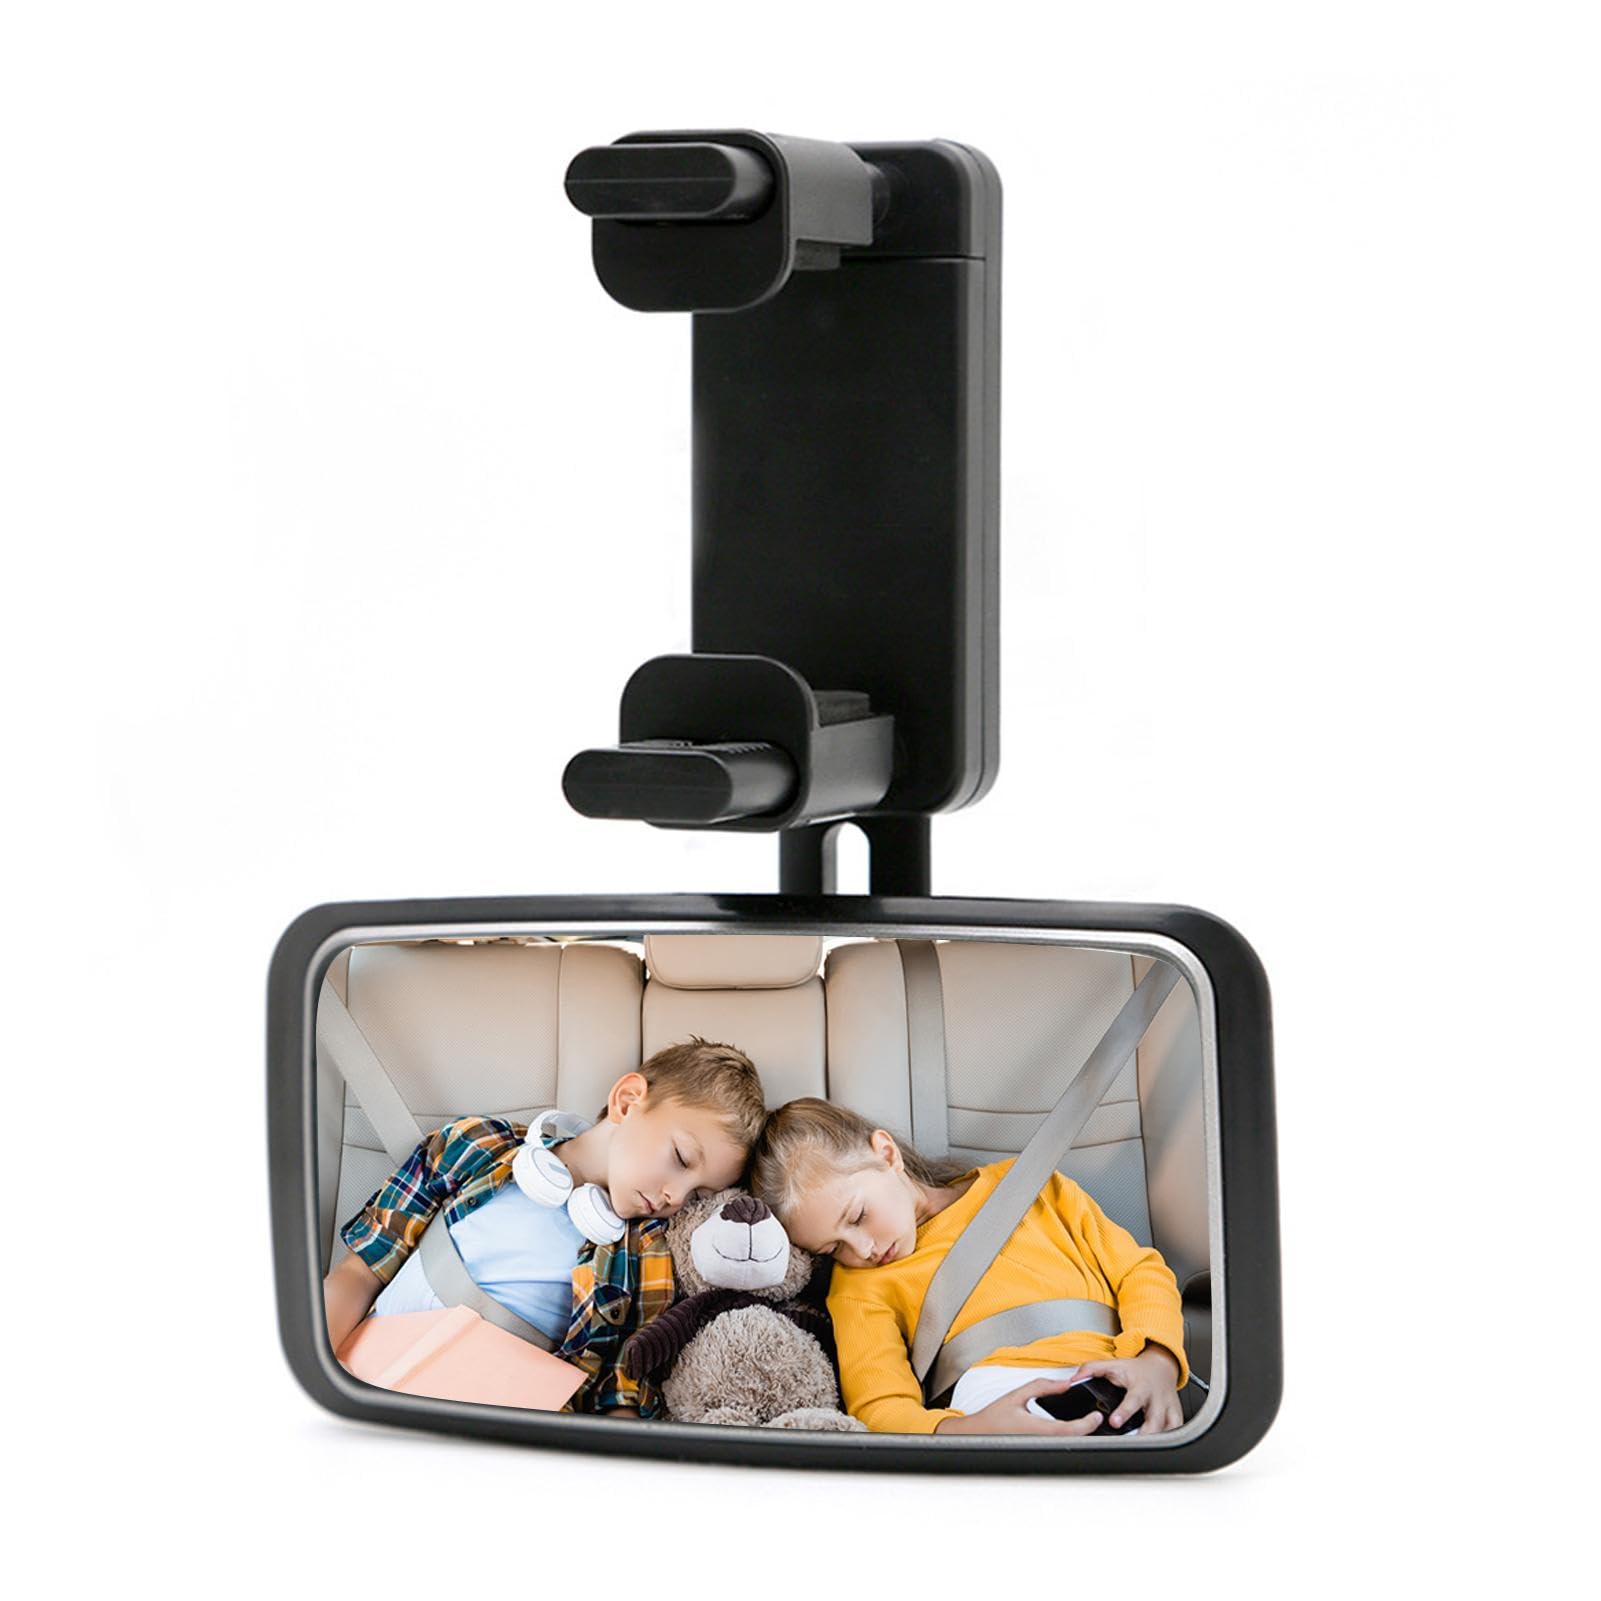 Kids Car Mirrors, 360-degree Car Seat Looking Glass, Baby Car Mirrors, Shatterproof Car Baby Mirrors, Adjustable Rear View, Easy To Use, Easy To Install, Suitable for Cars von Filvczt